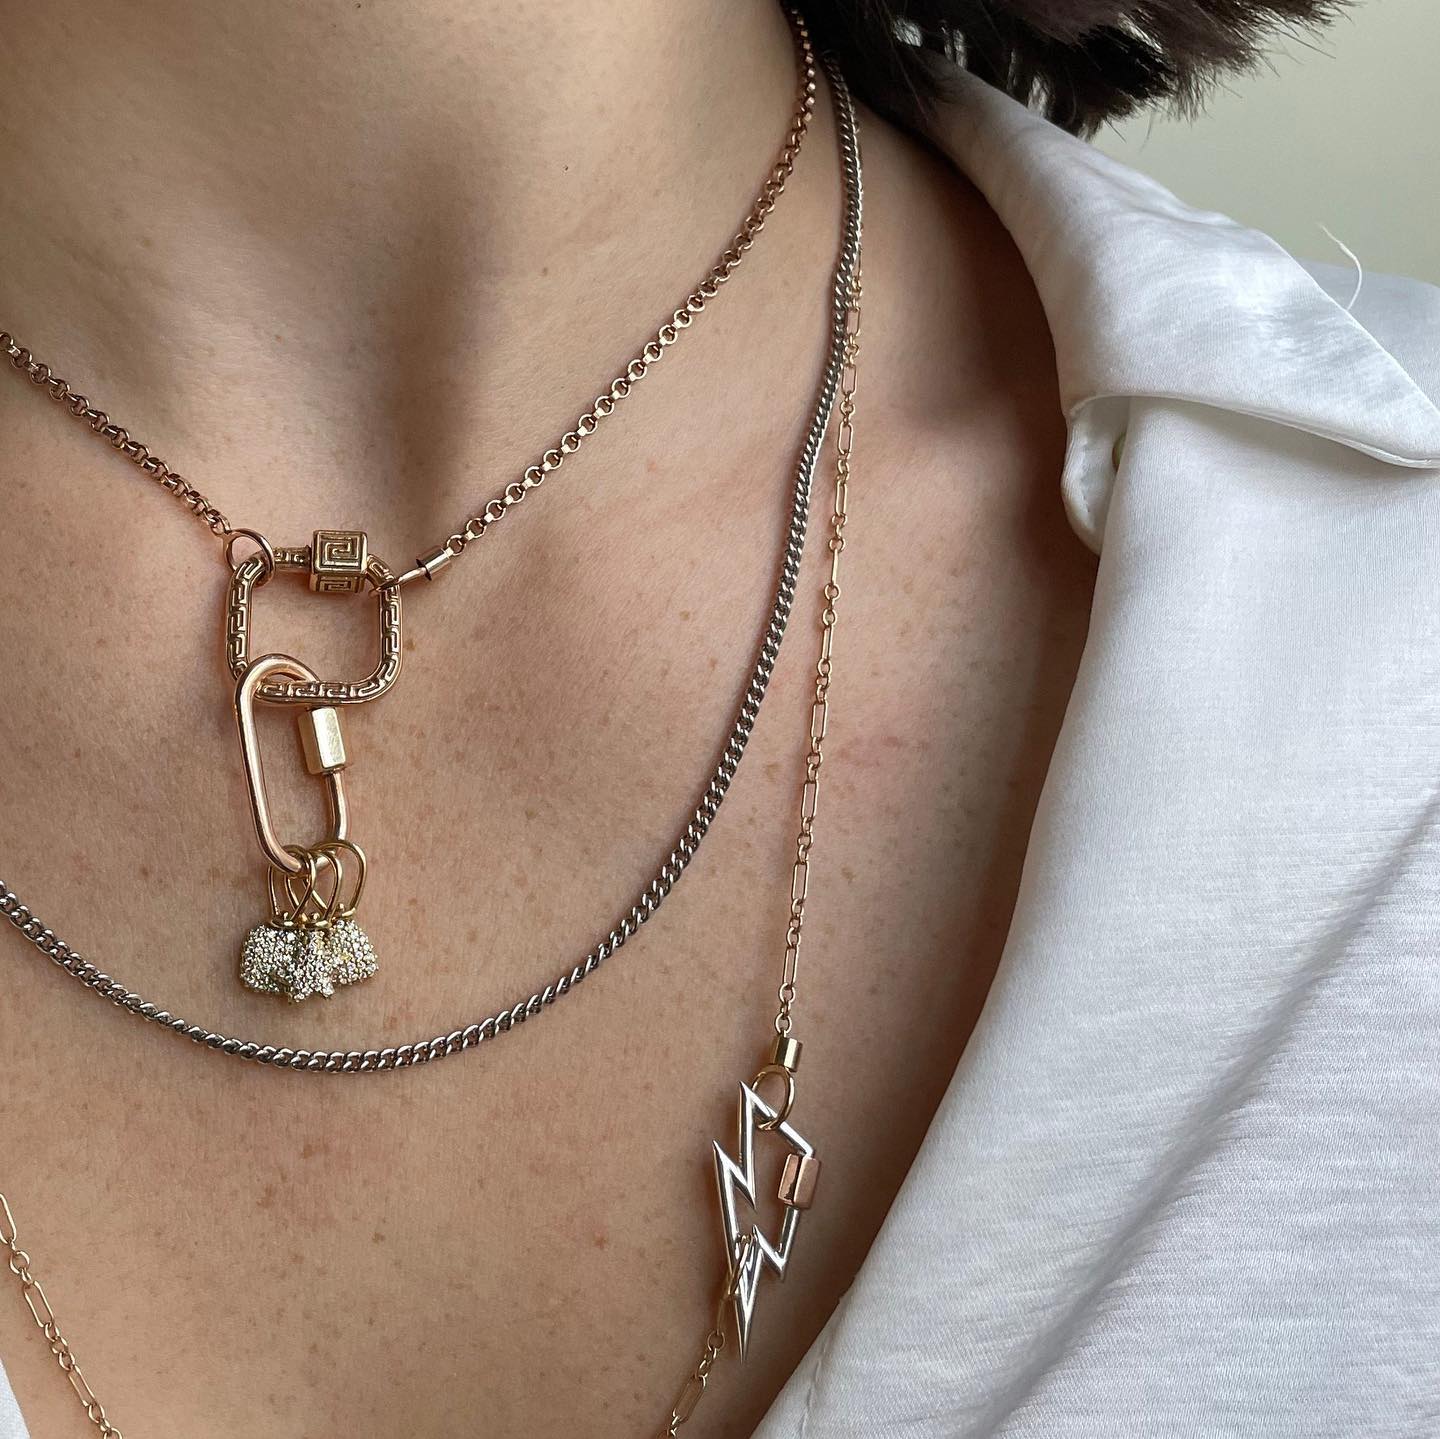 Close up of woman's neck wearing necklace with Greek key meander pendant